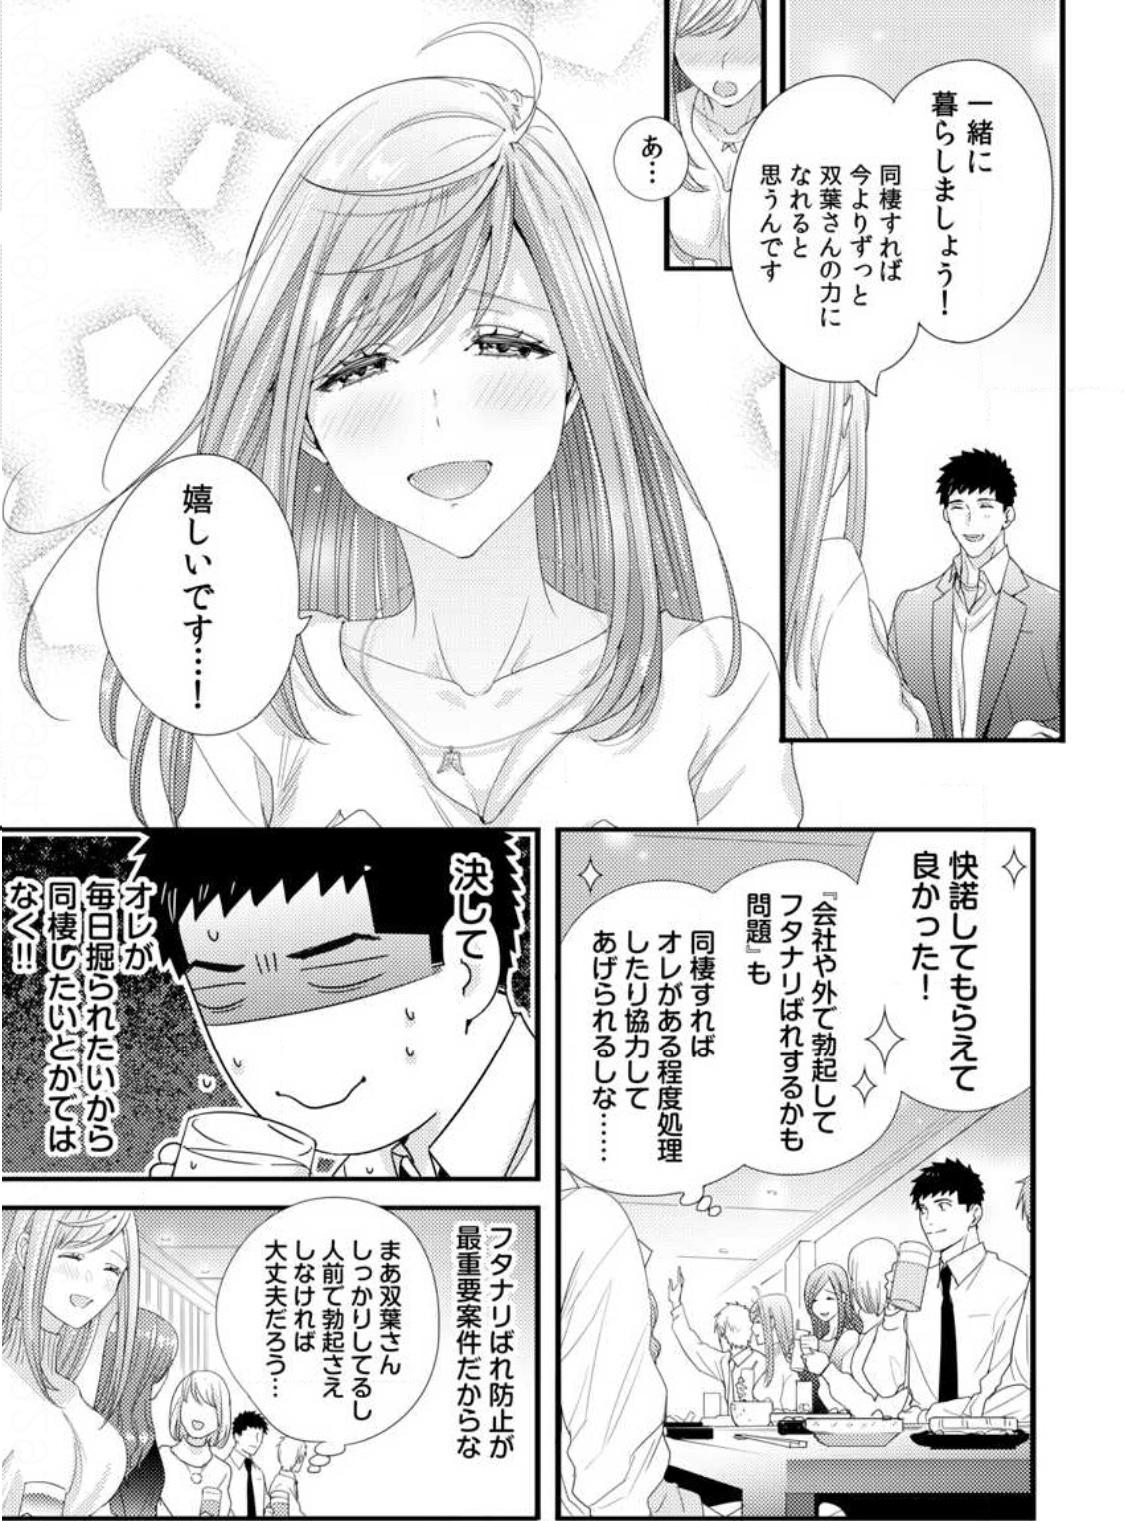 Please Let Me Hold You Futaba-San! Ch. 1-4 80